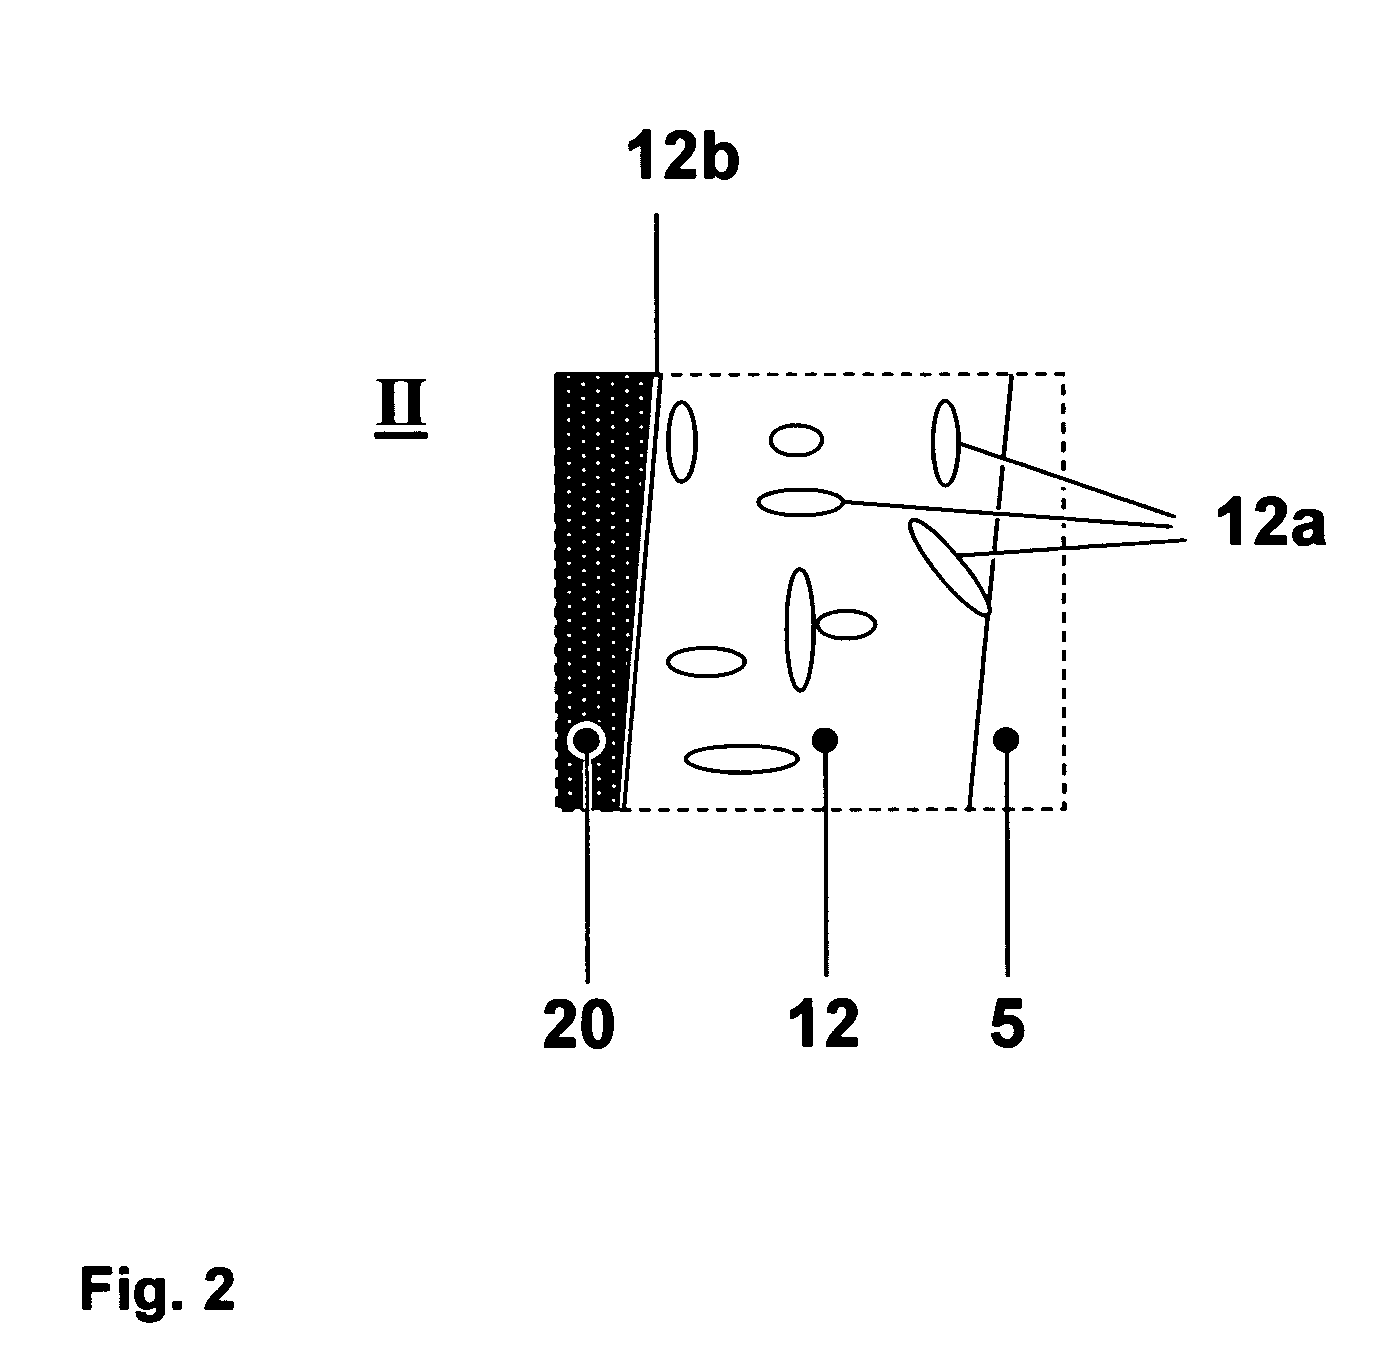 Method for casting a directionally solidified article